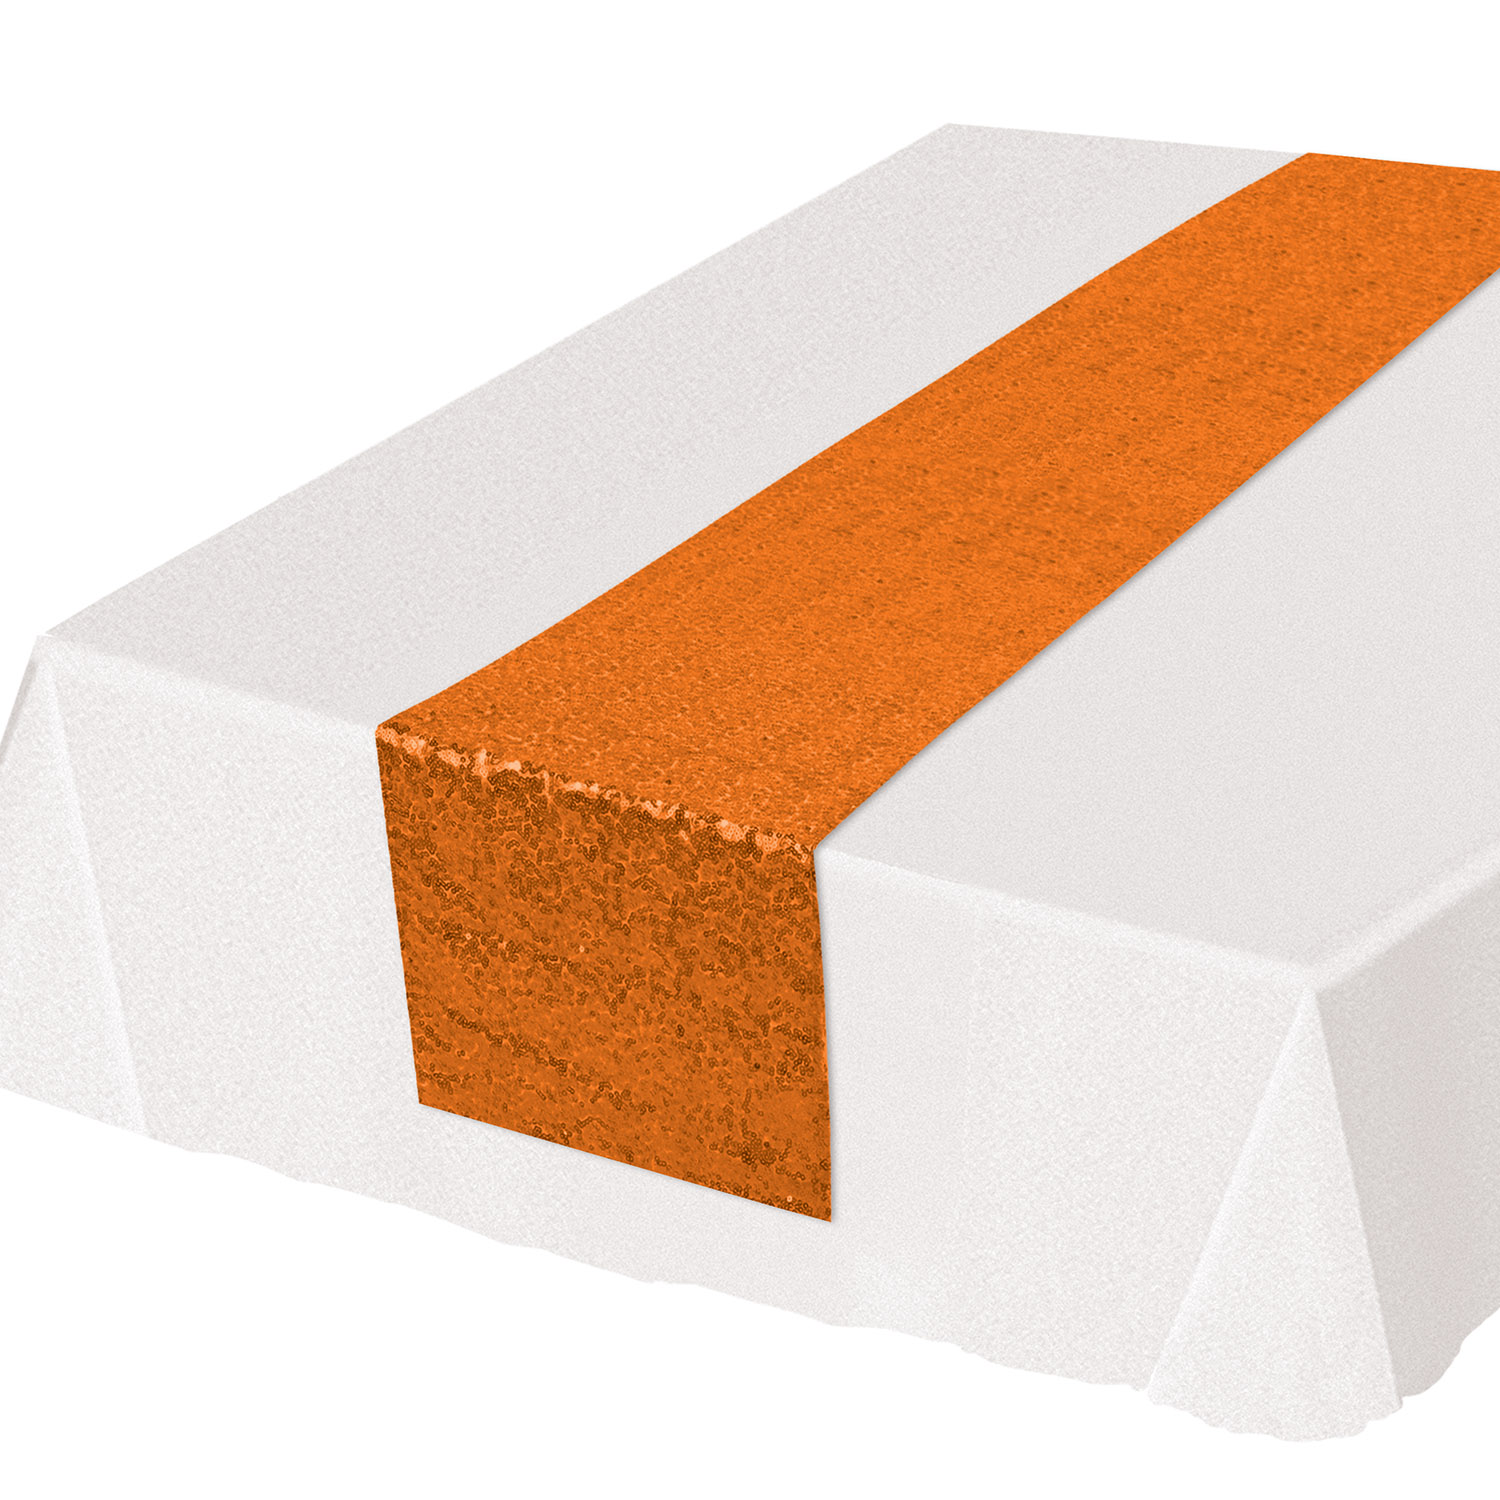 Orange Sequined Table Runner (Pack of 12) Sequined Table Runner, sequined, table runner, decoration, orange, new years eve, prom, wholesale, inexpensive, bulk